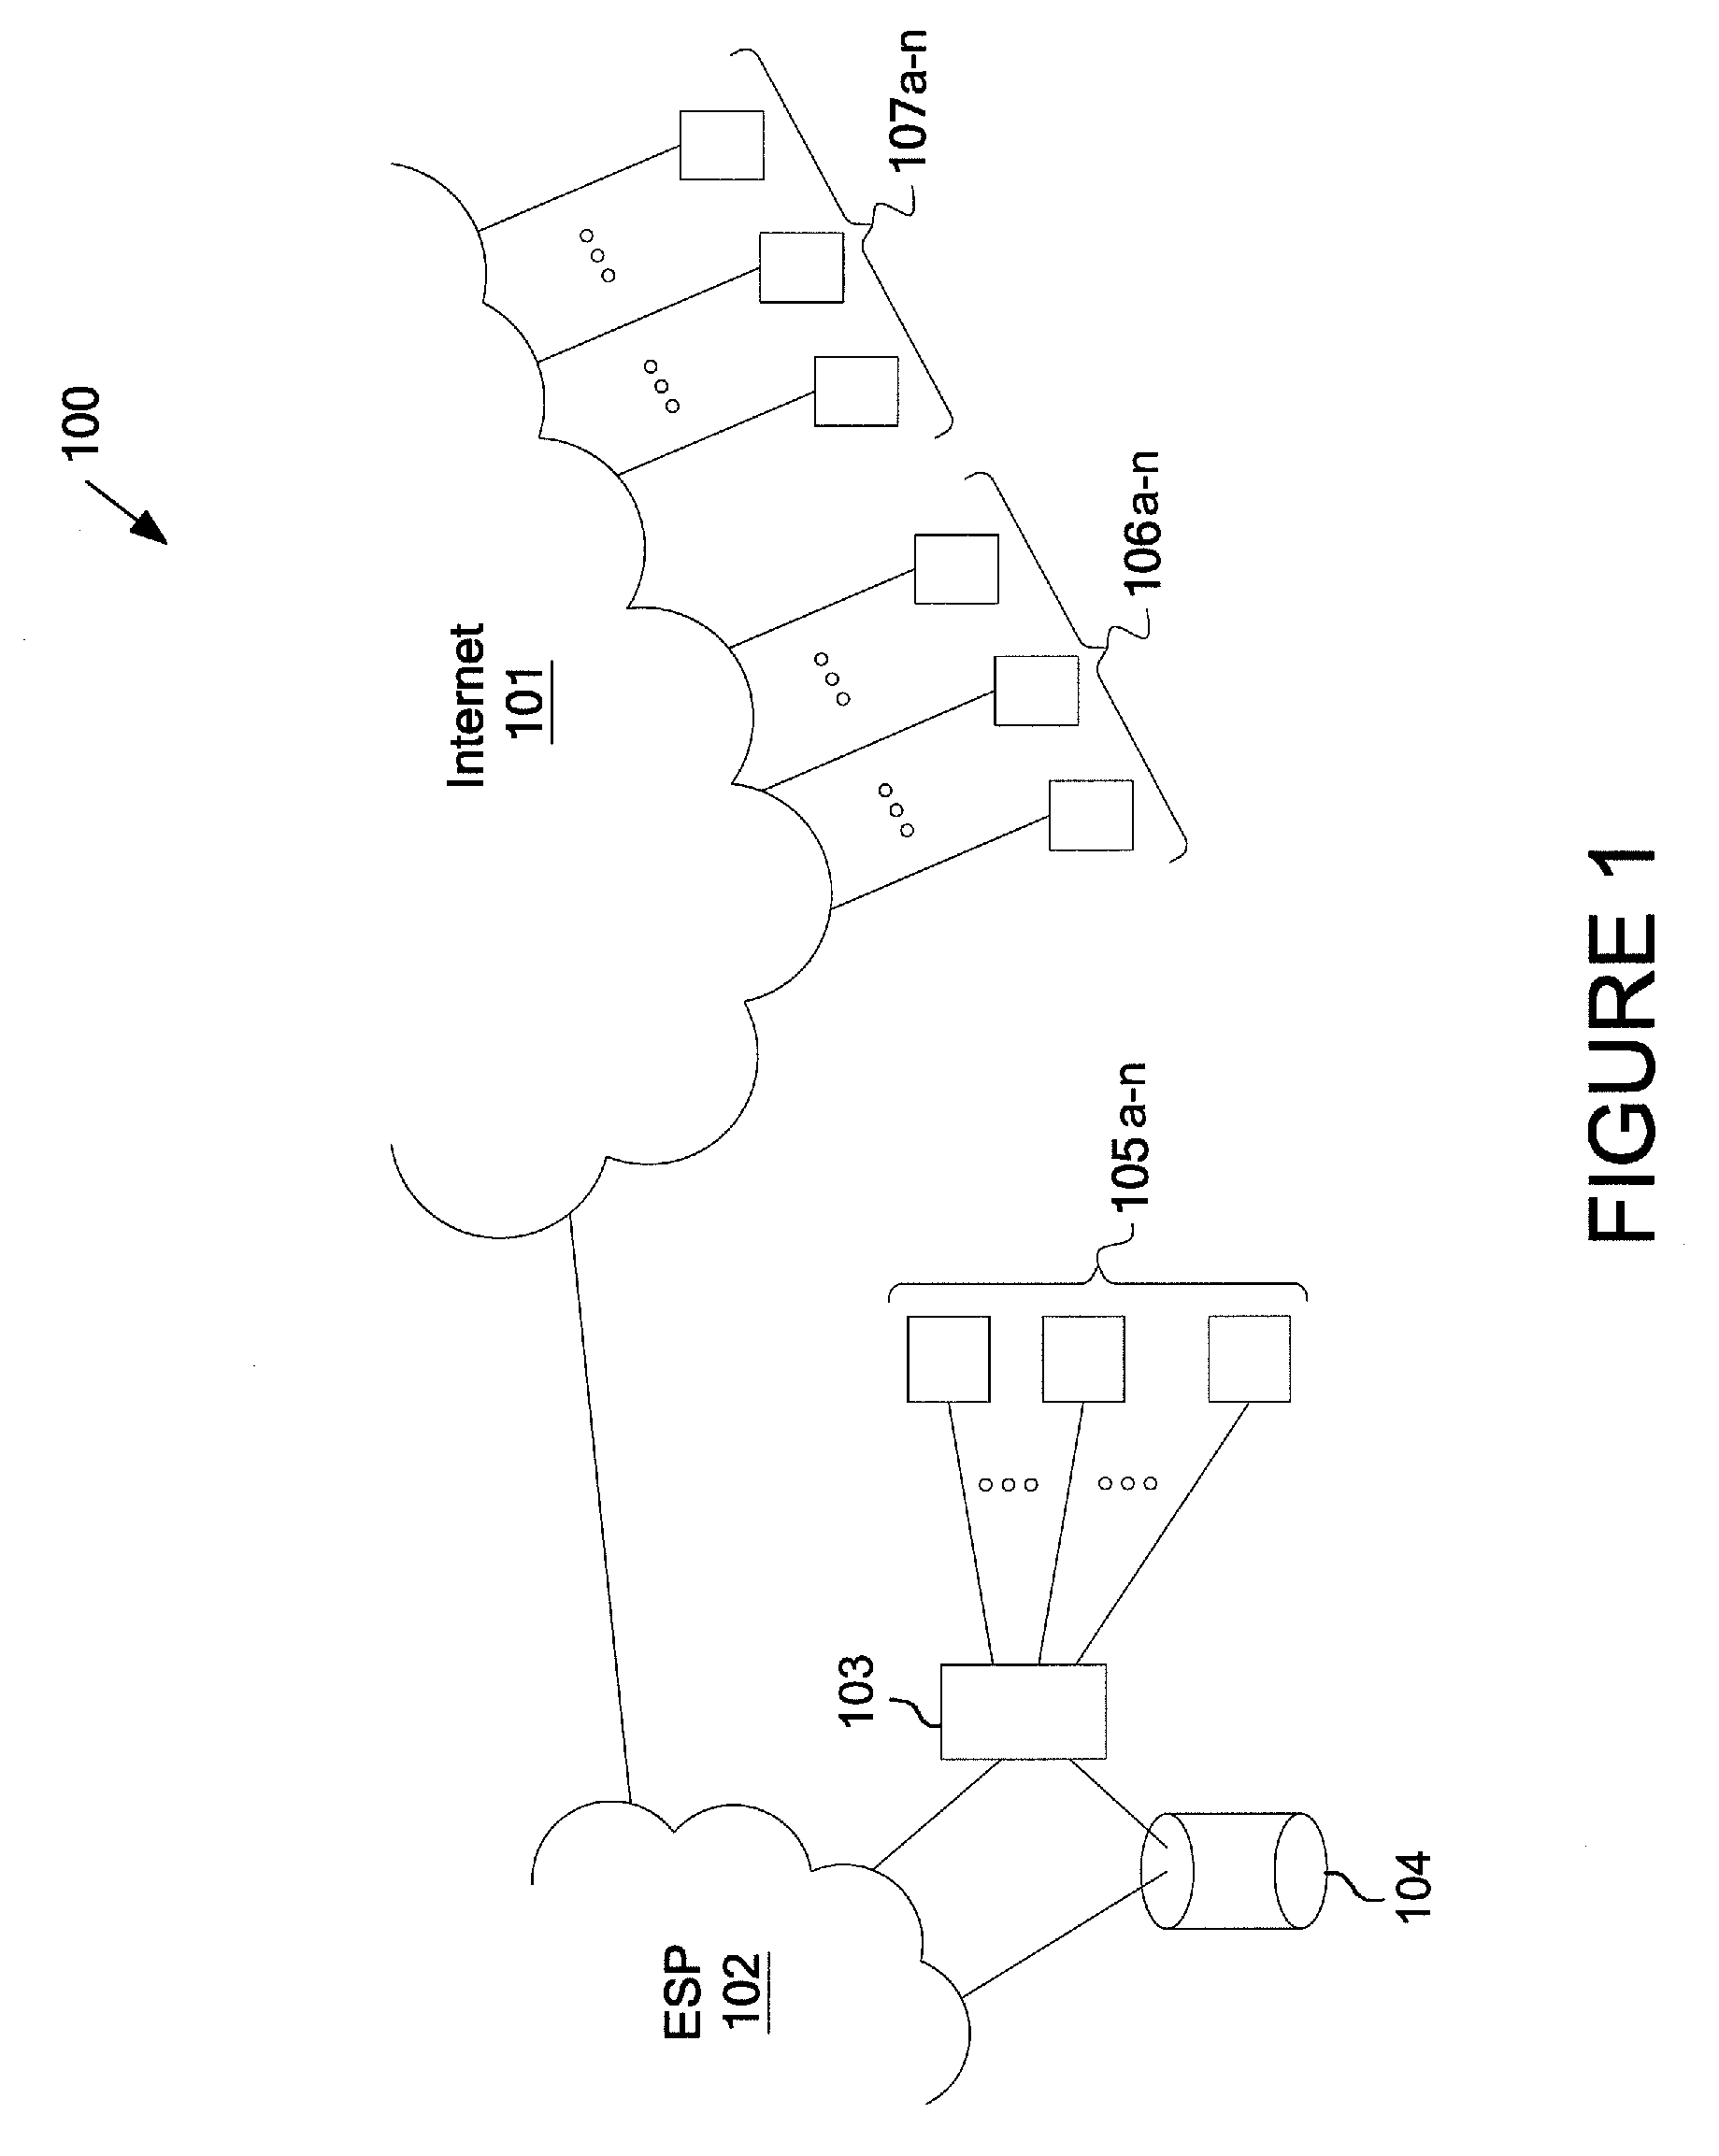 System and Method for Tracking Spending Based on Reservations and Payments